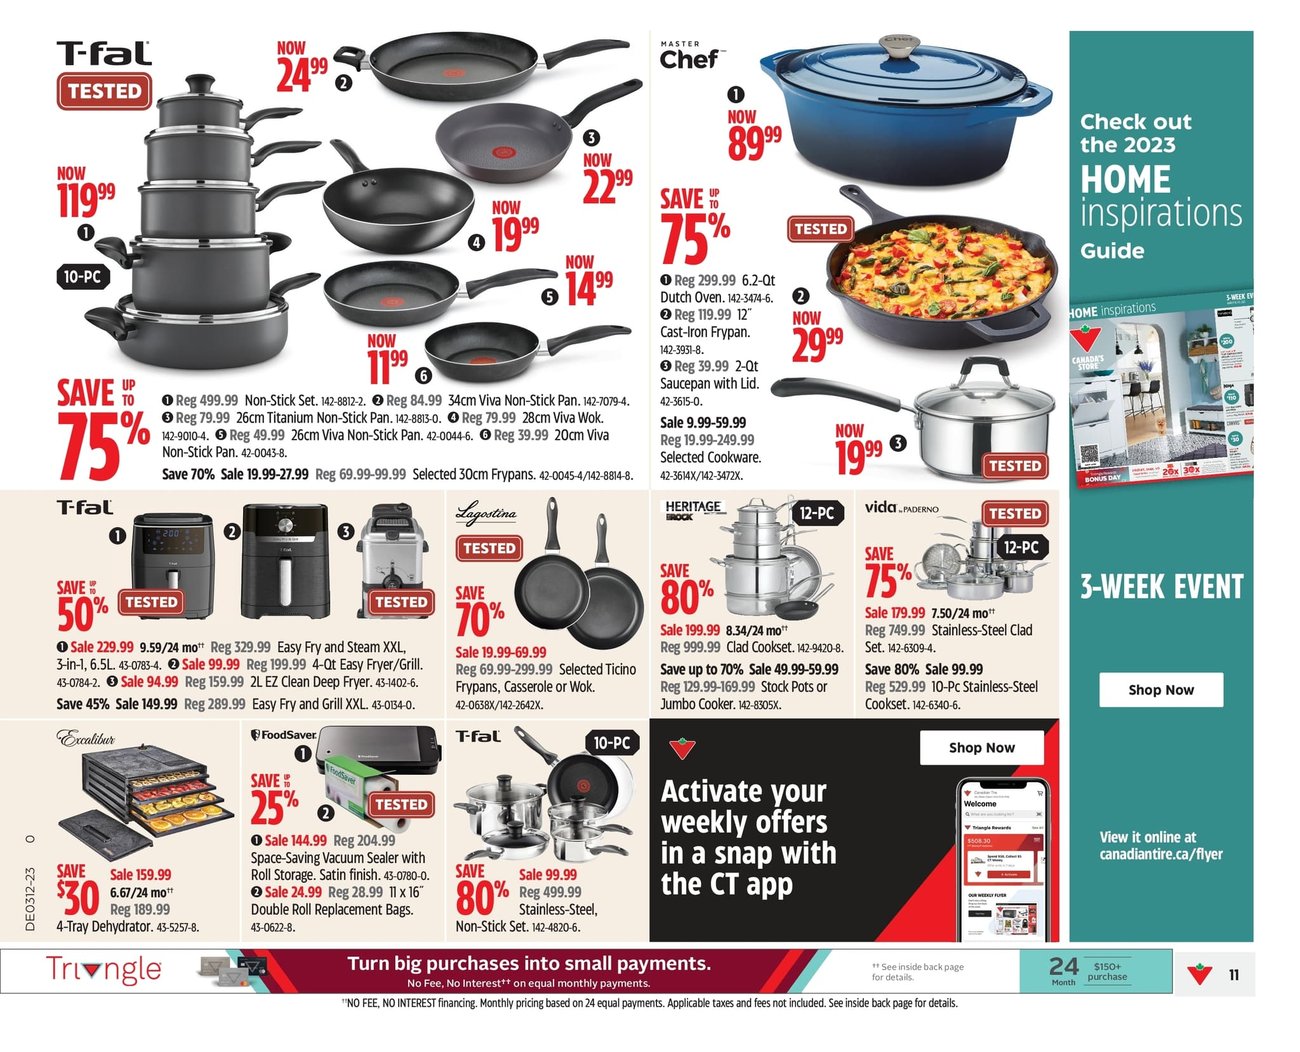 Canadian Tire - Weekly Flyer Specials - Page 14